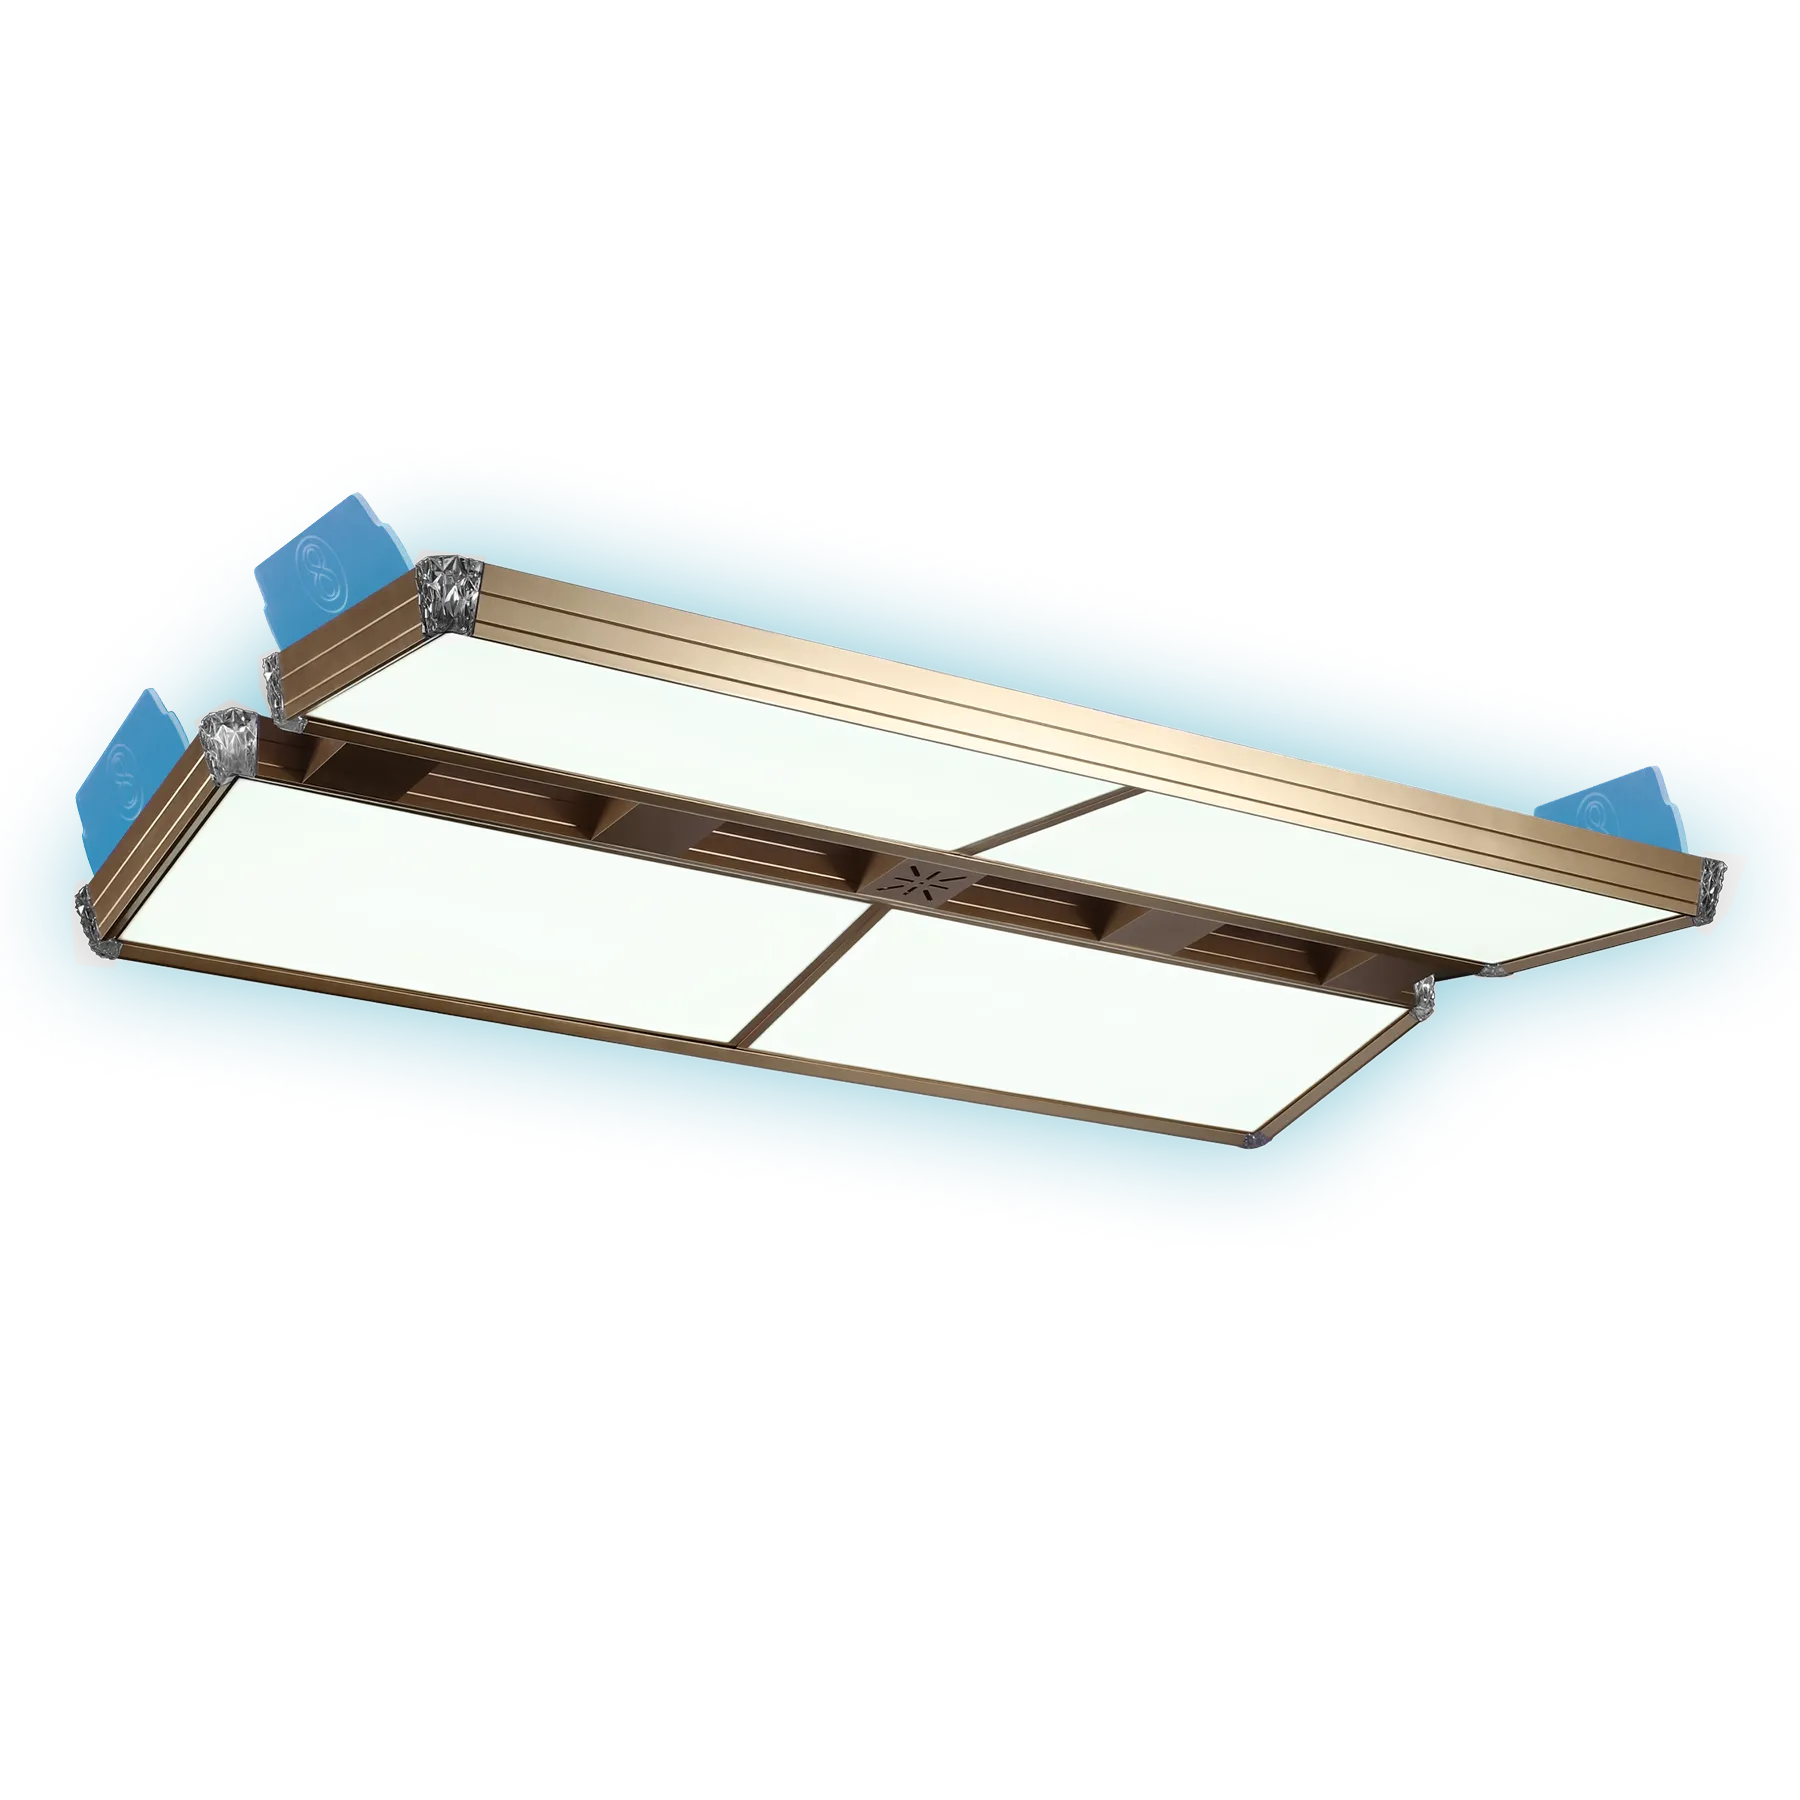 LED BILLIARD LIGHT - A Series A2 - For 9FT Pool Table